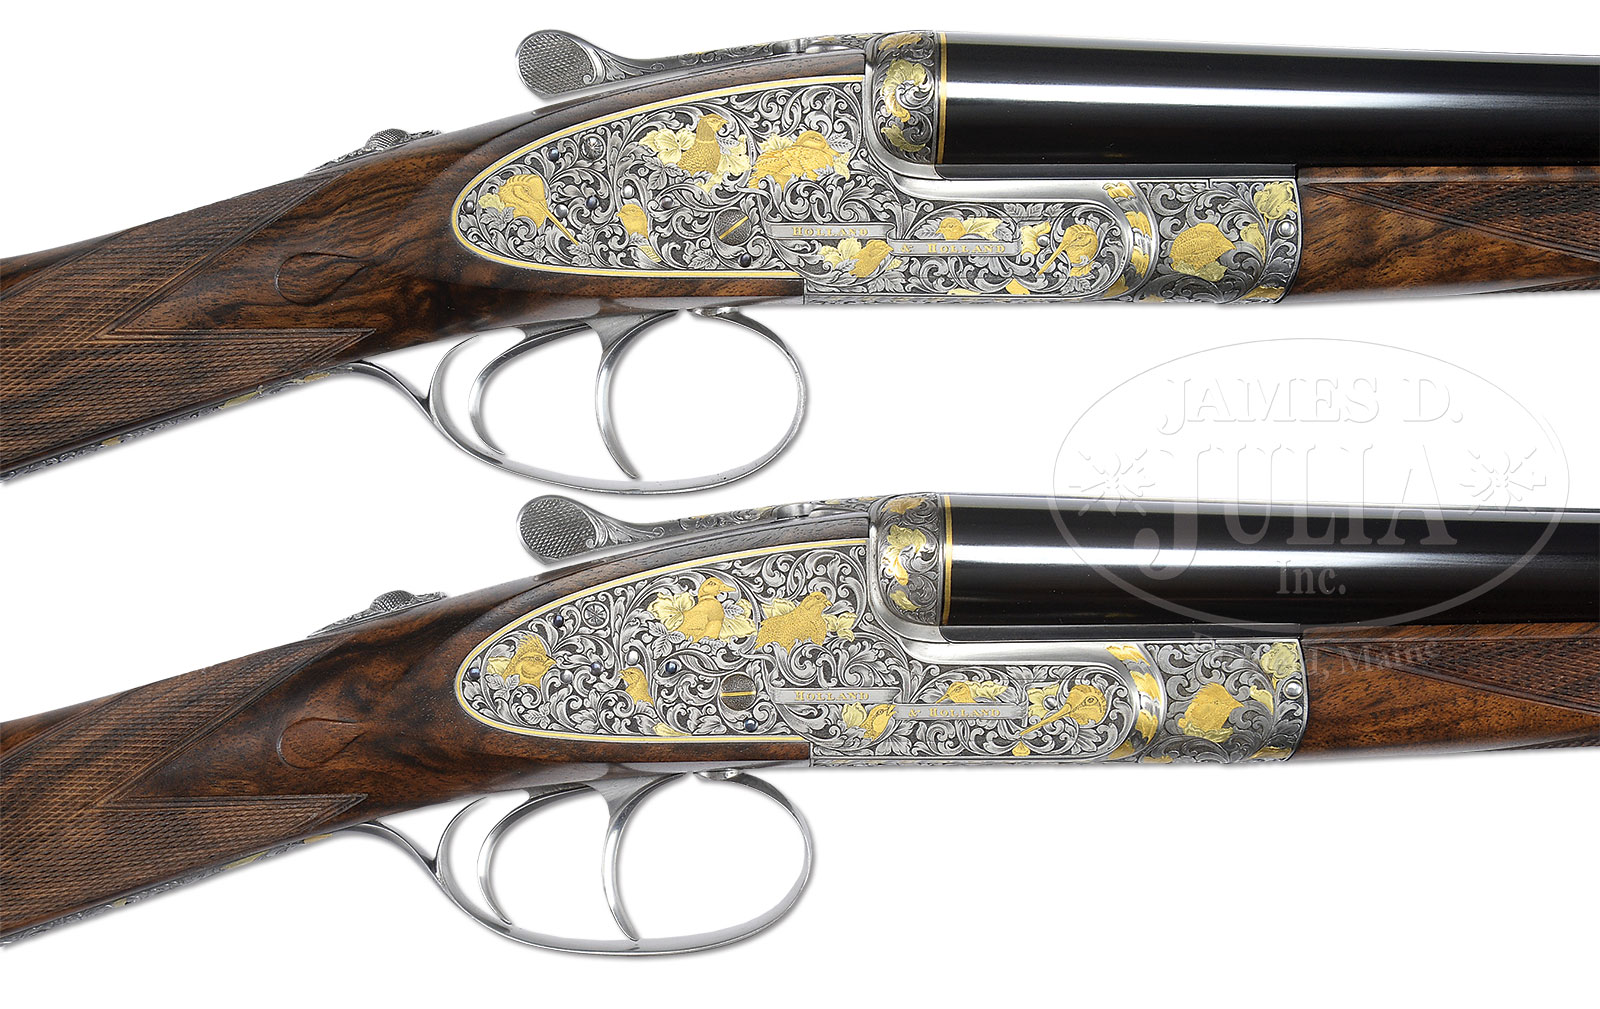 STUNNING BEAUTIFULLY MATCHED PAIR OF 28 GAUGE HOLLAND & HOLLAND “ROYAL DELUXE” SHOTGUNS WITH SUPERBLY RENDERED DRAMATIC SCROLL AND FINELY DETAILED TWO-COLOR GOLD INLAYS BY SIMON COGGAN, WITH CUSTOM FACTORY CASE.